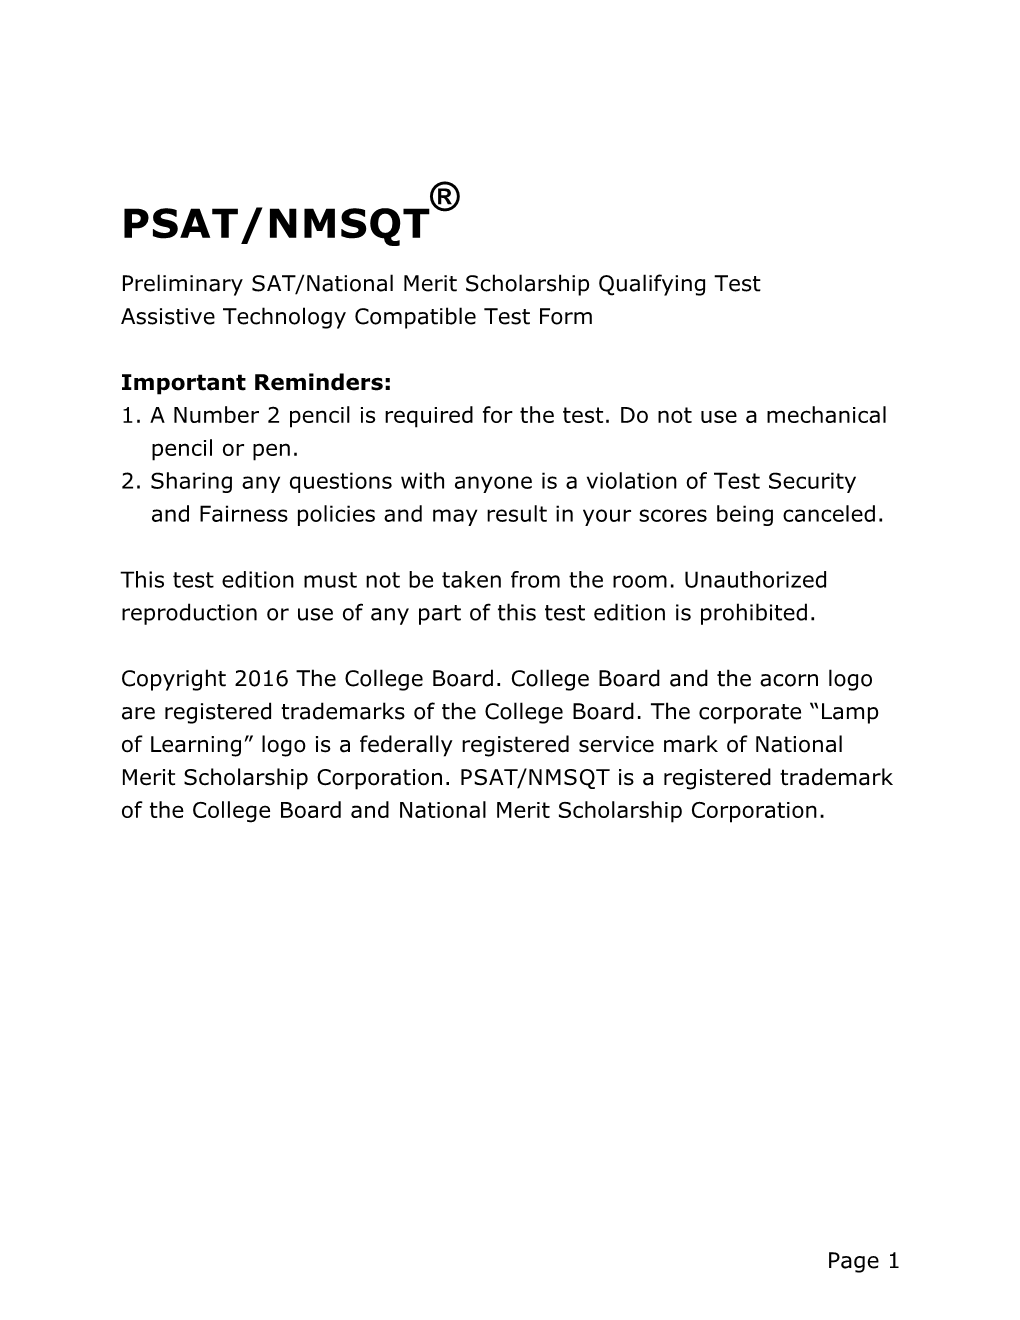 PSAT/NMSQT Practice Test 2 Tips for Assistive Technology SAT Suite of Assessments the College